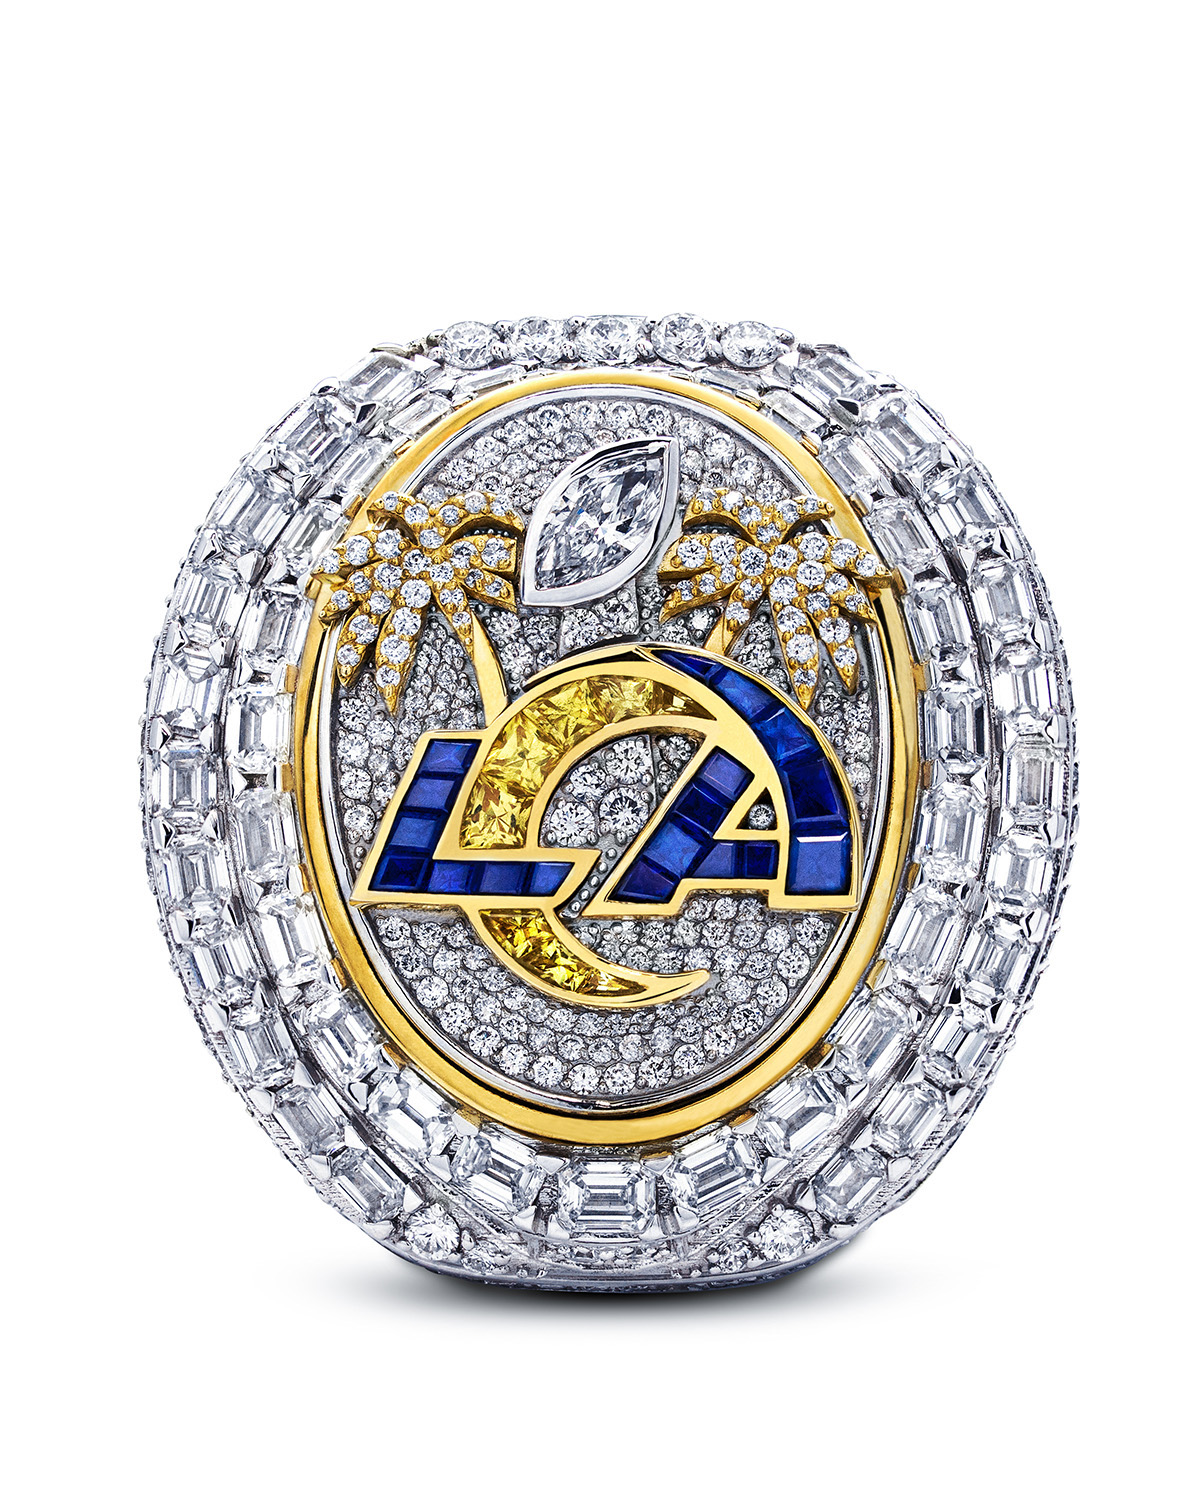 The los angeles rams super bowl lvi ring has the most diamond carat weight in championship ring history